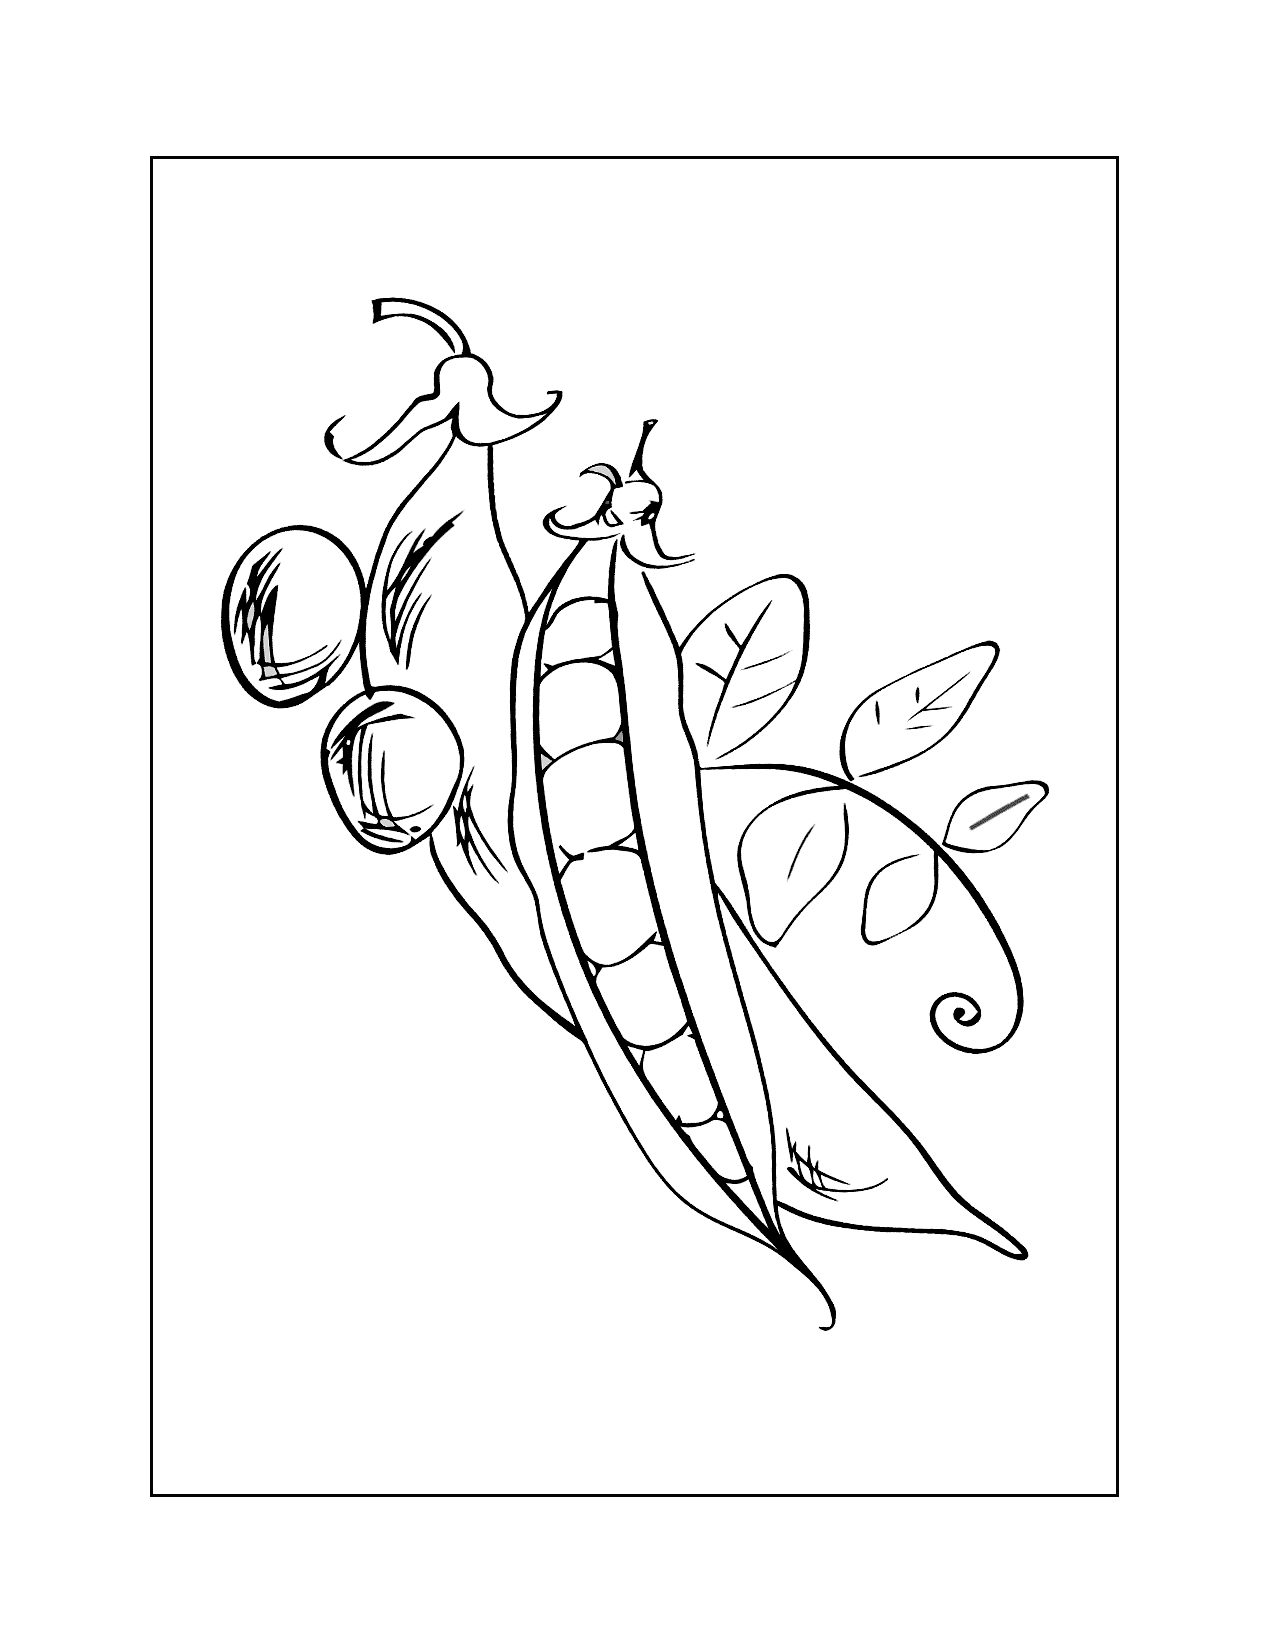 Peas In A Pod Coloring Page